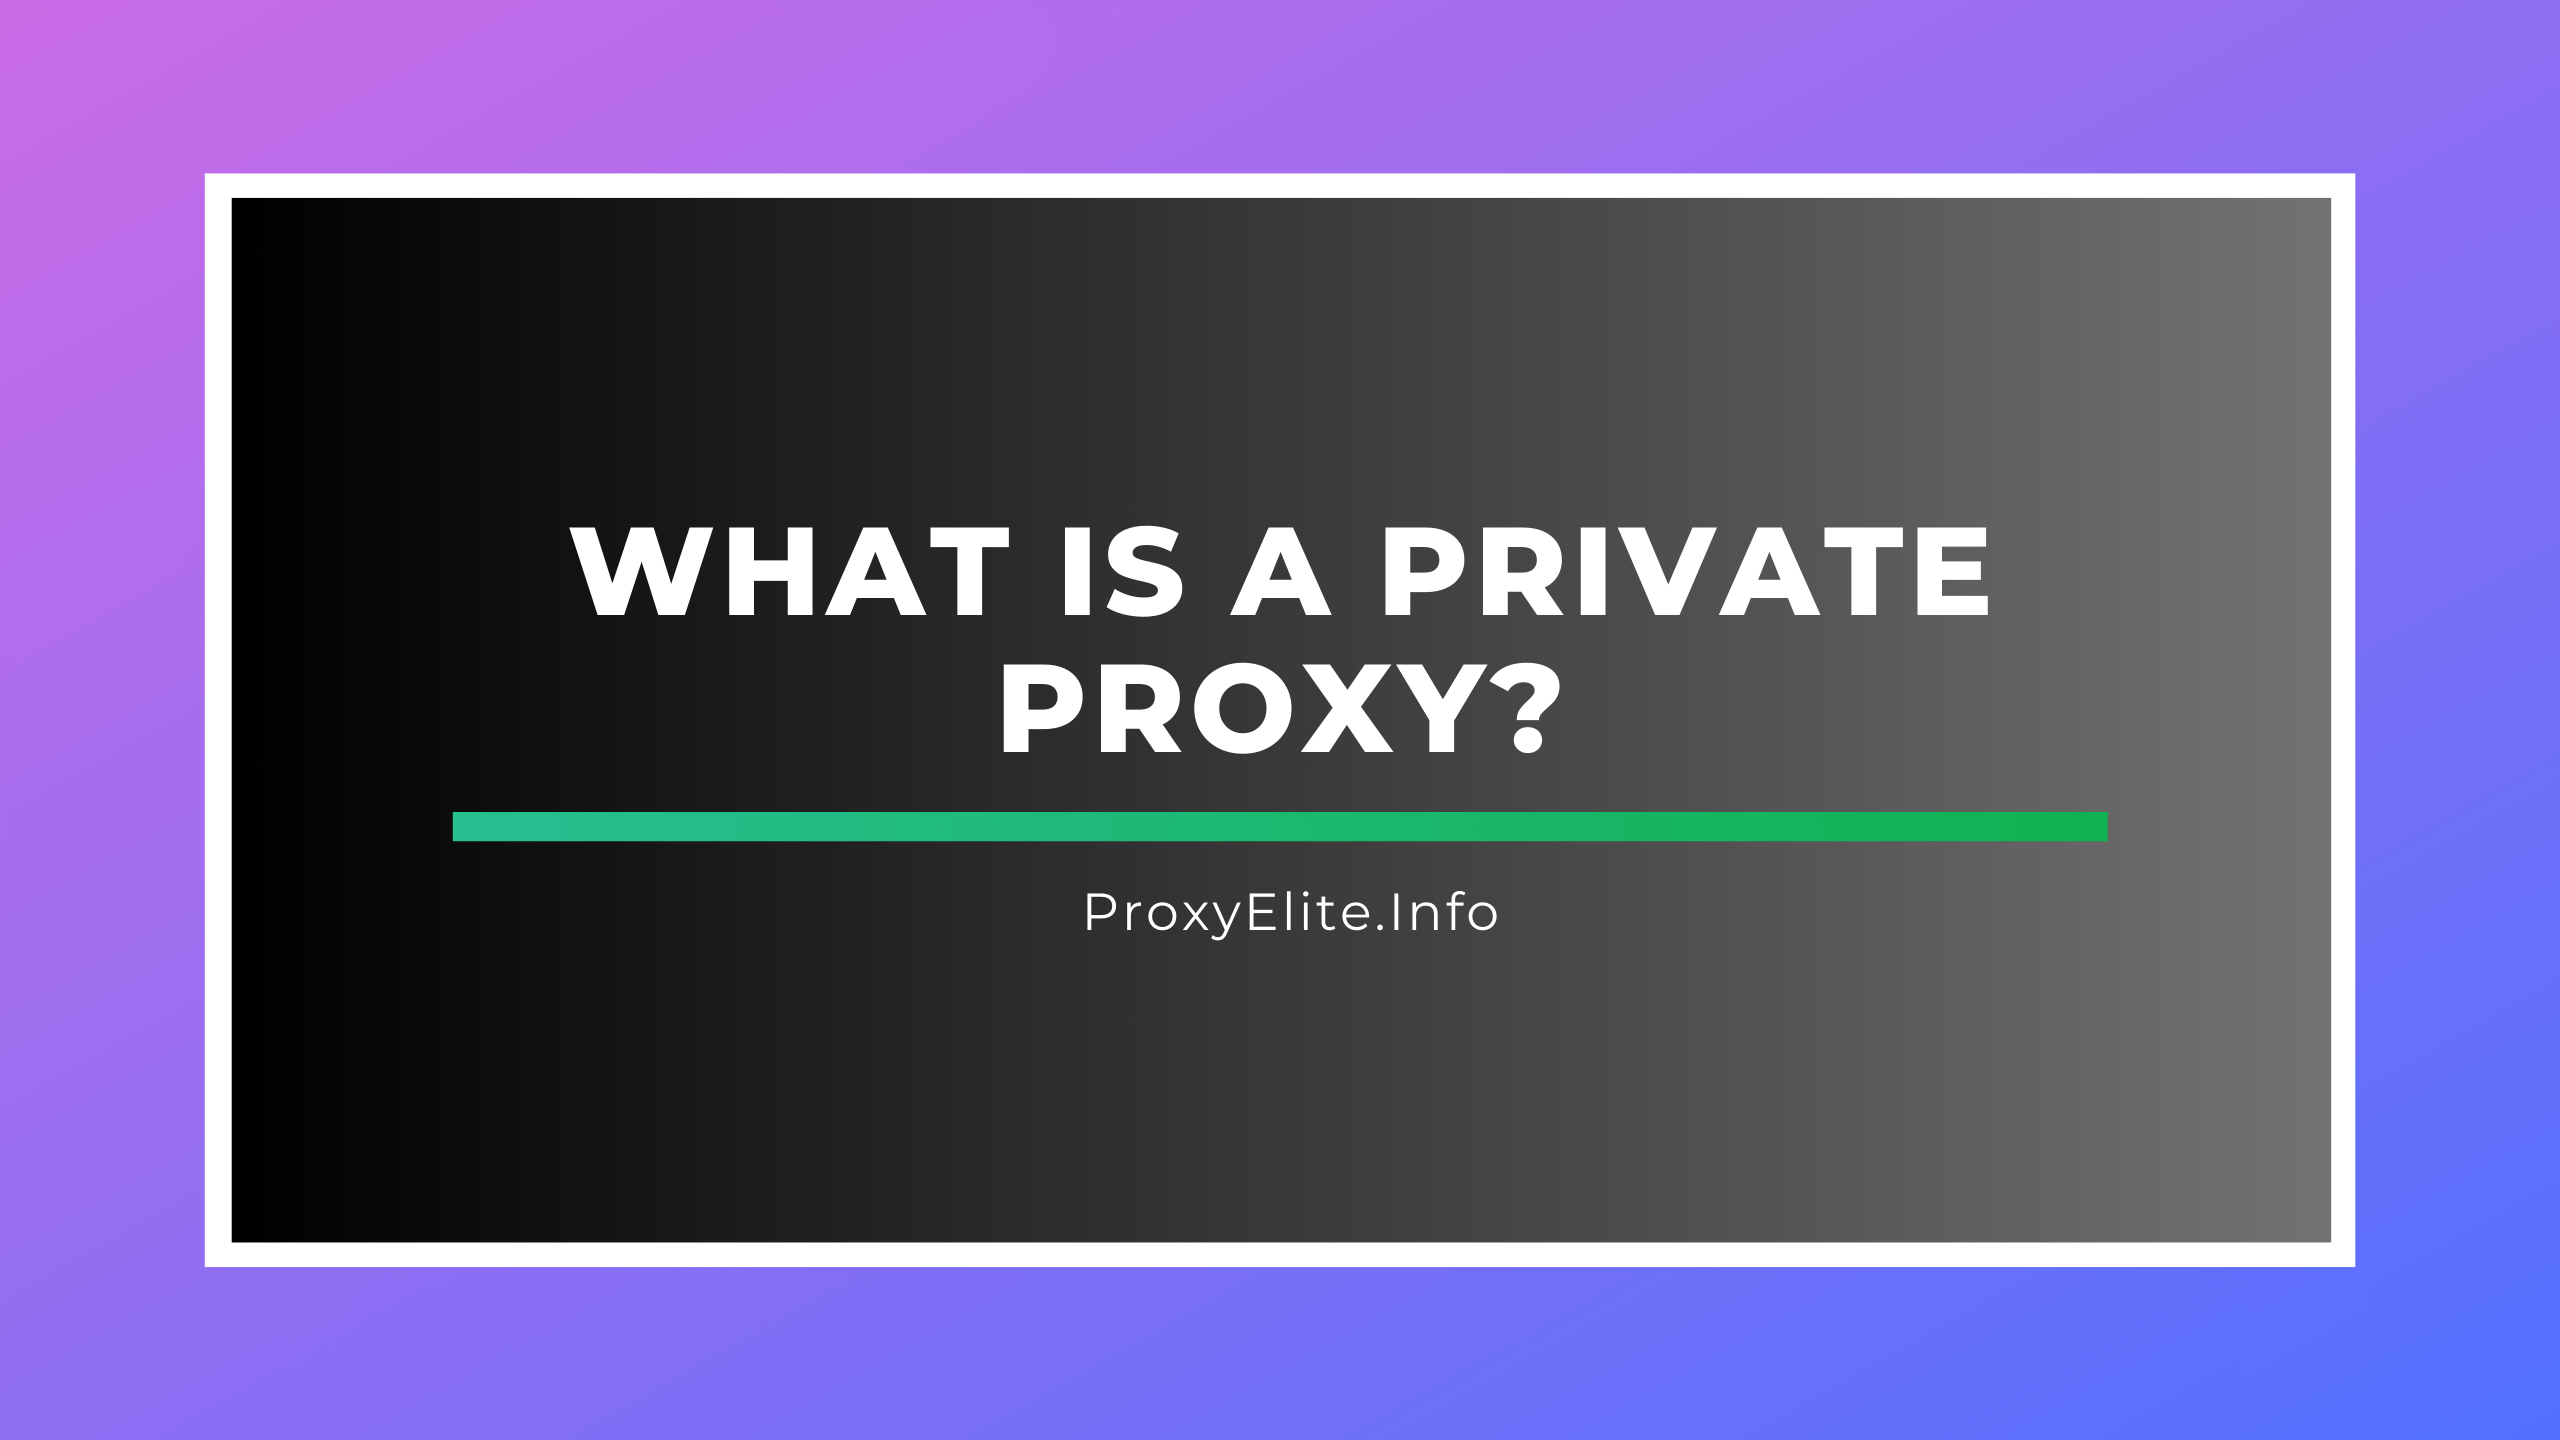 What is a Private Proxy?